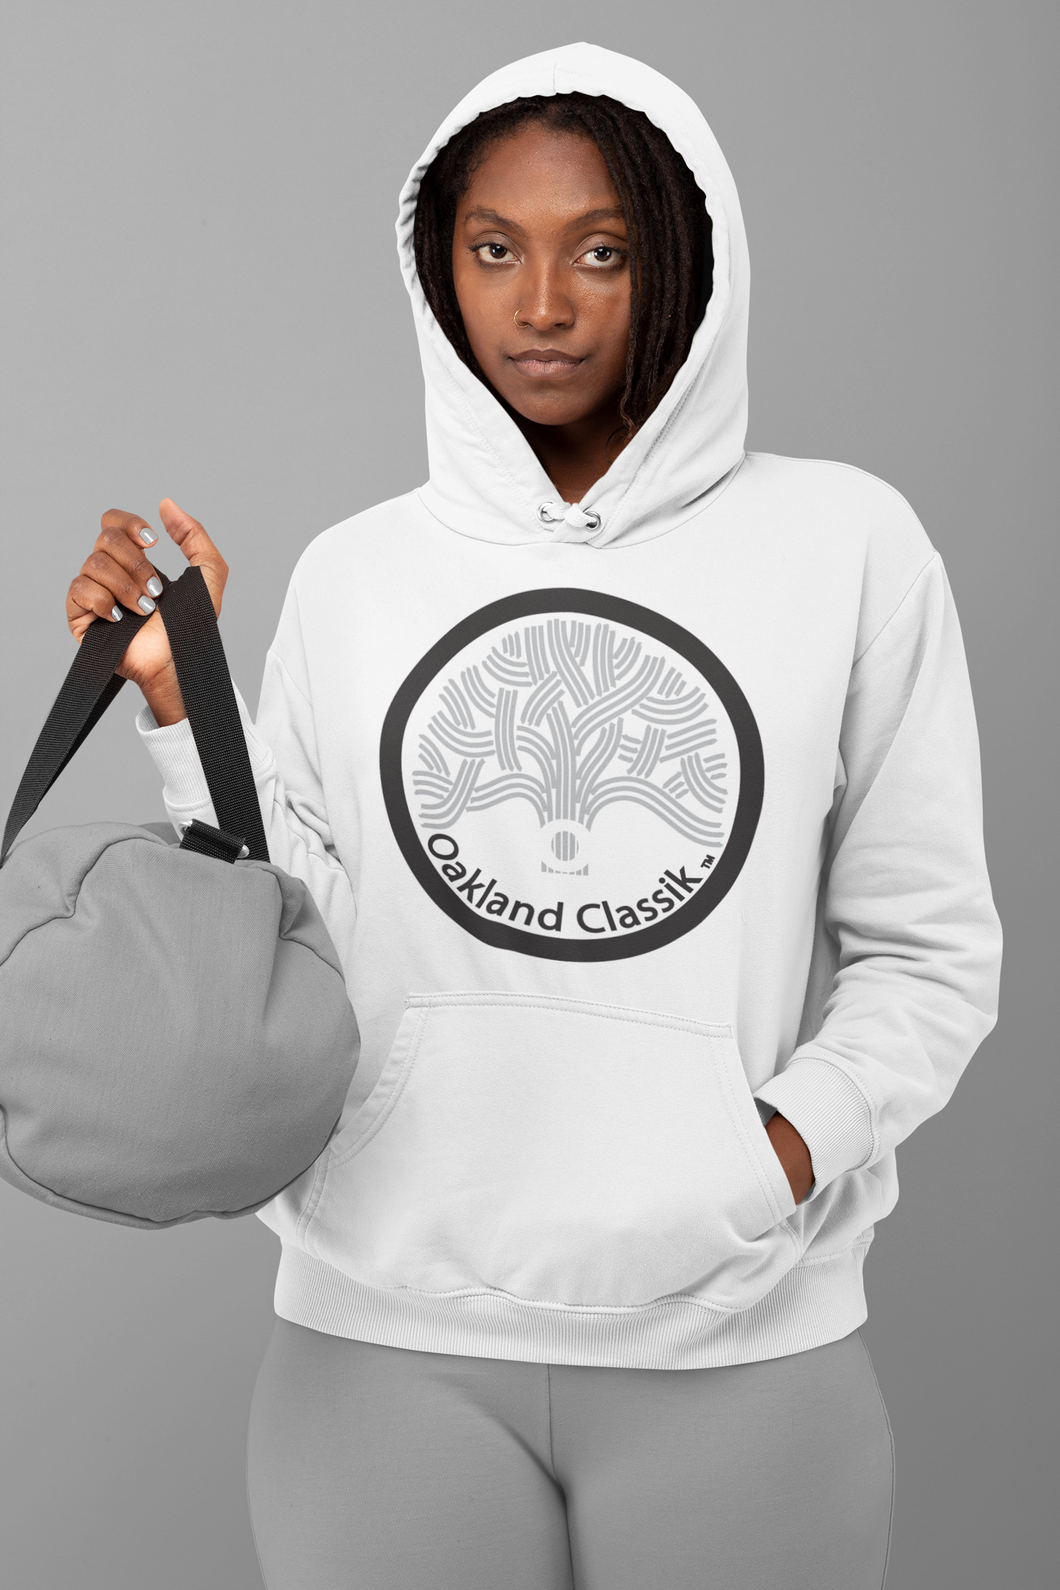 Oakland Classik Bright White Hoodie with Black and Grey logo